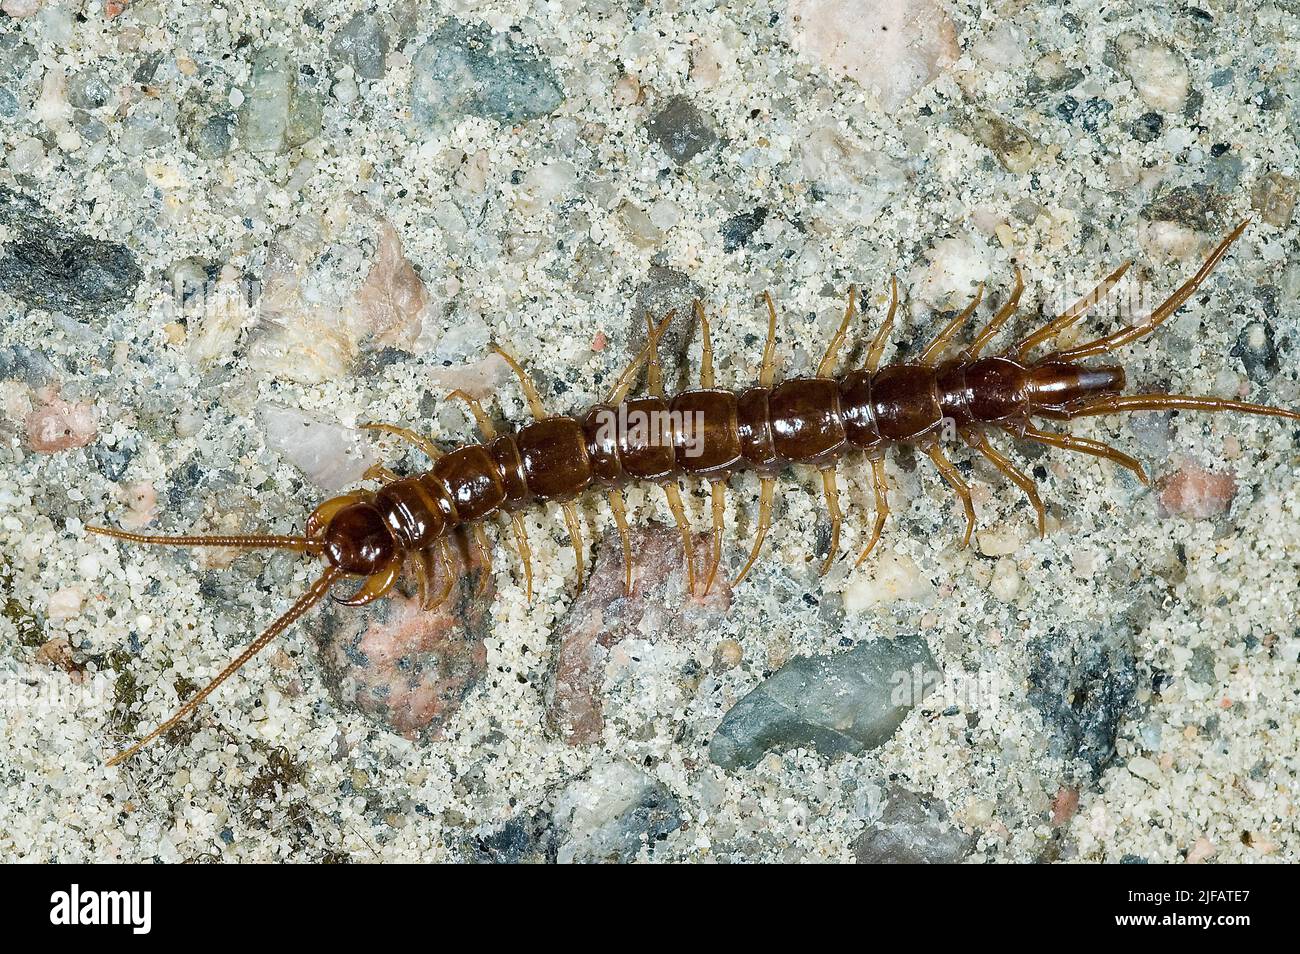 Brown centipede (Lithobius forficatus) from southern Norway. Stock Photo